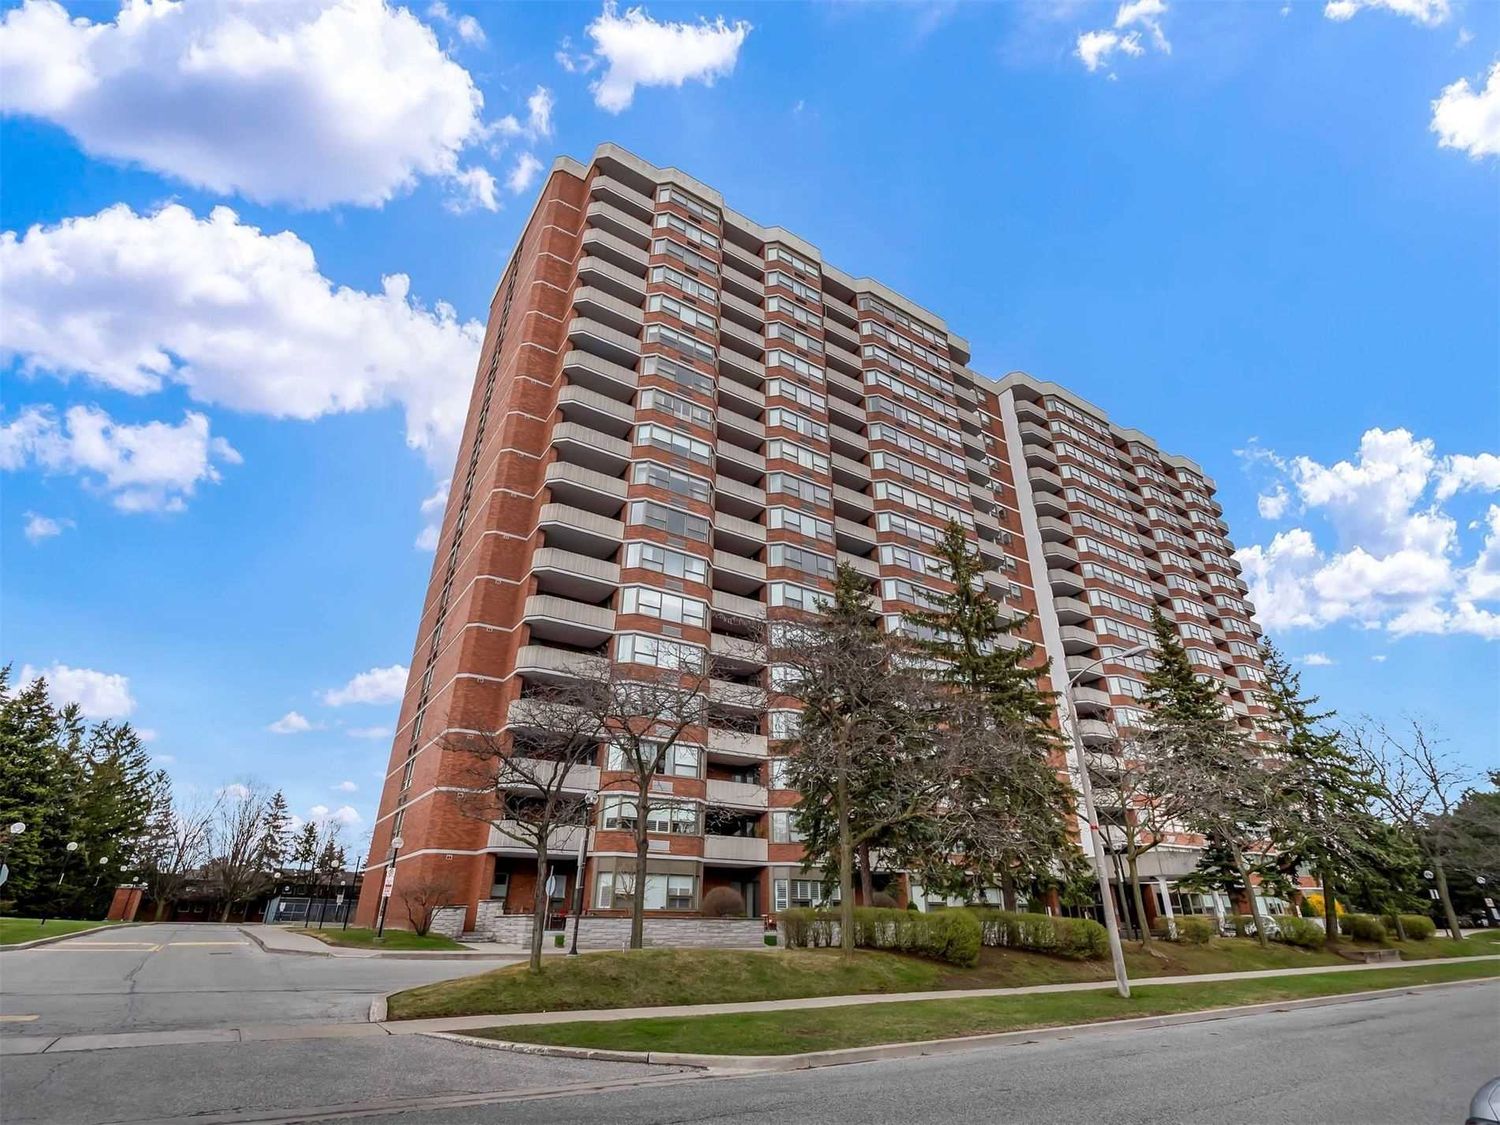 121 Ling Road. Scarborough Wood Condos is located in  Scarborough, Toronto - image #1 of 3